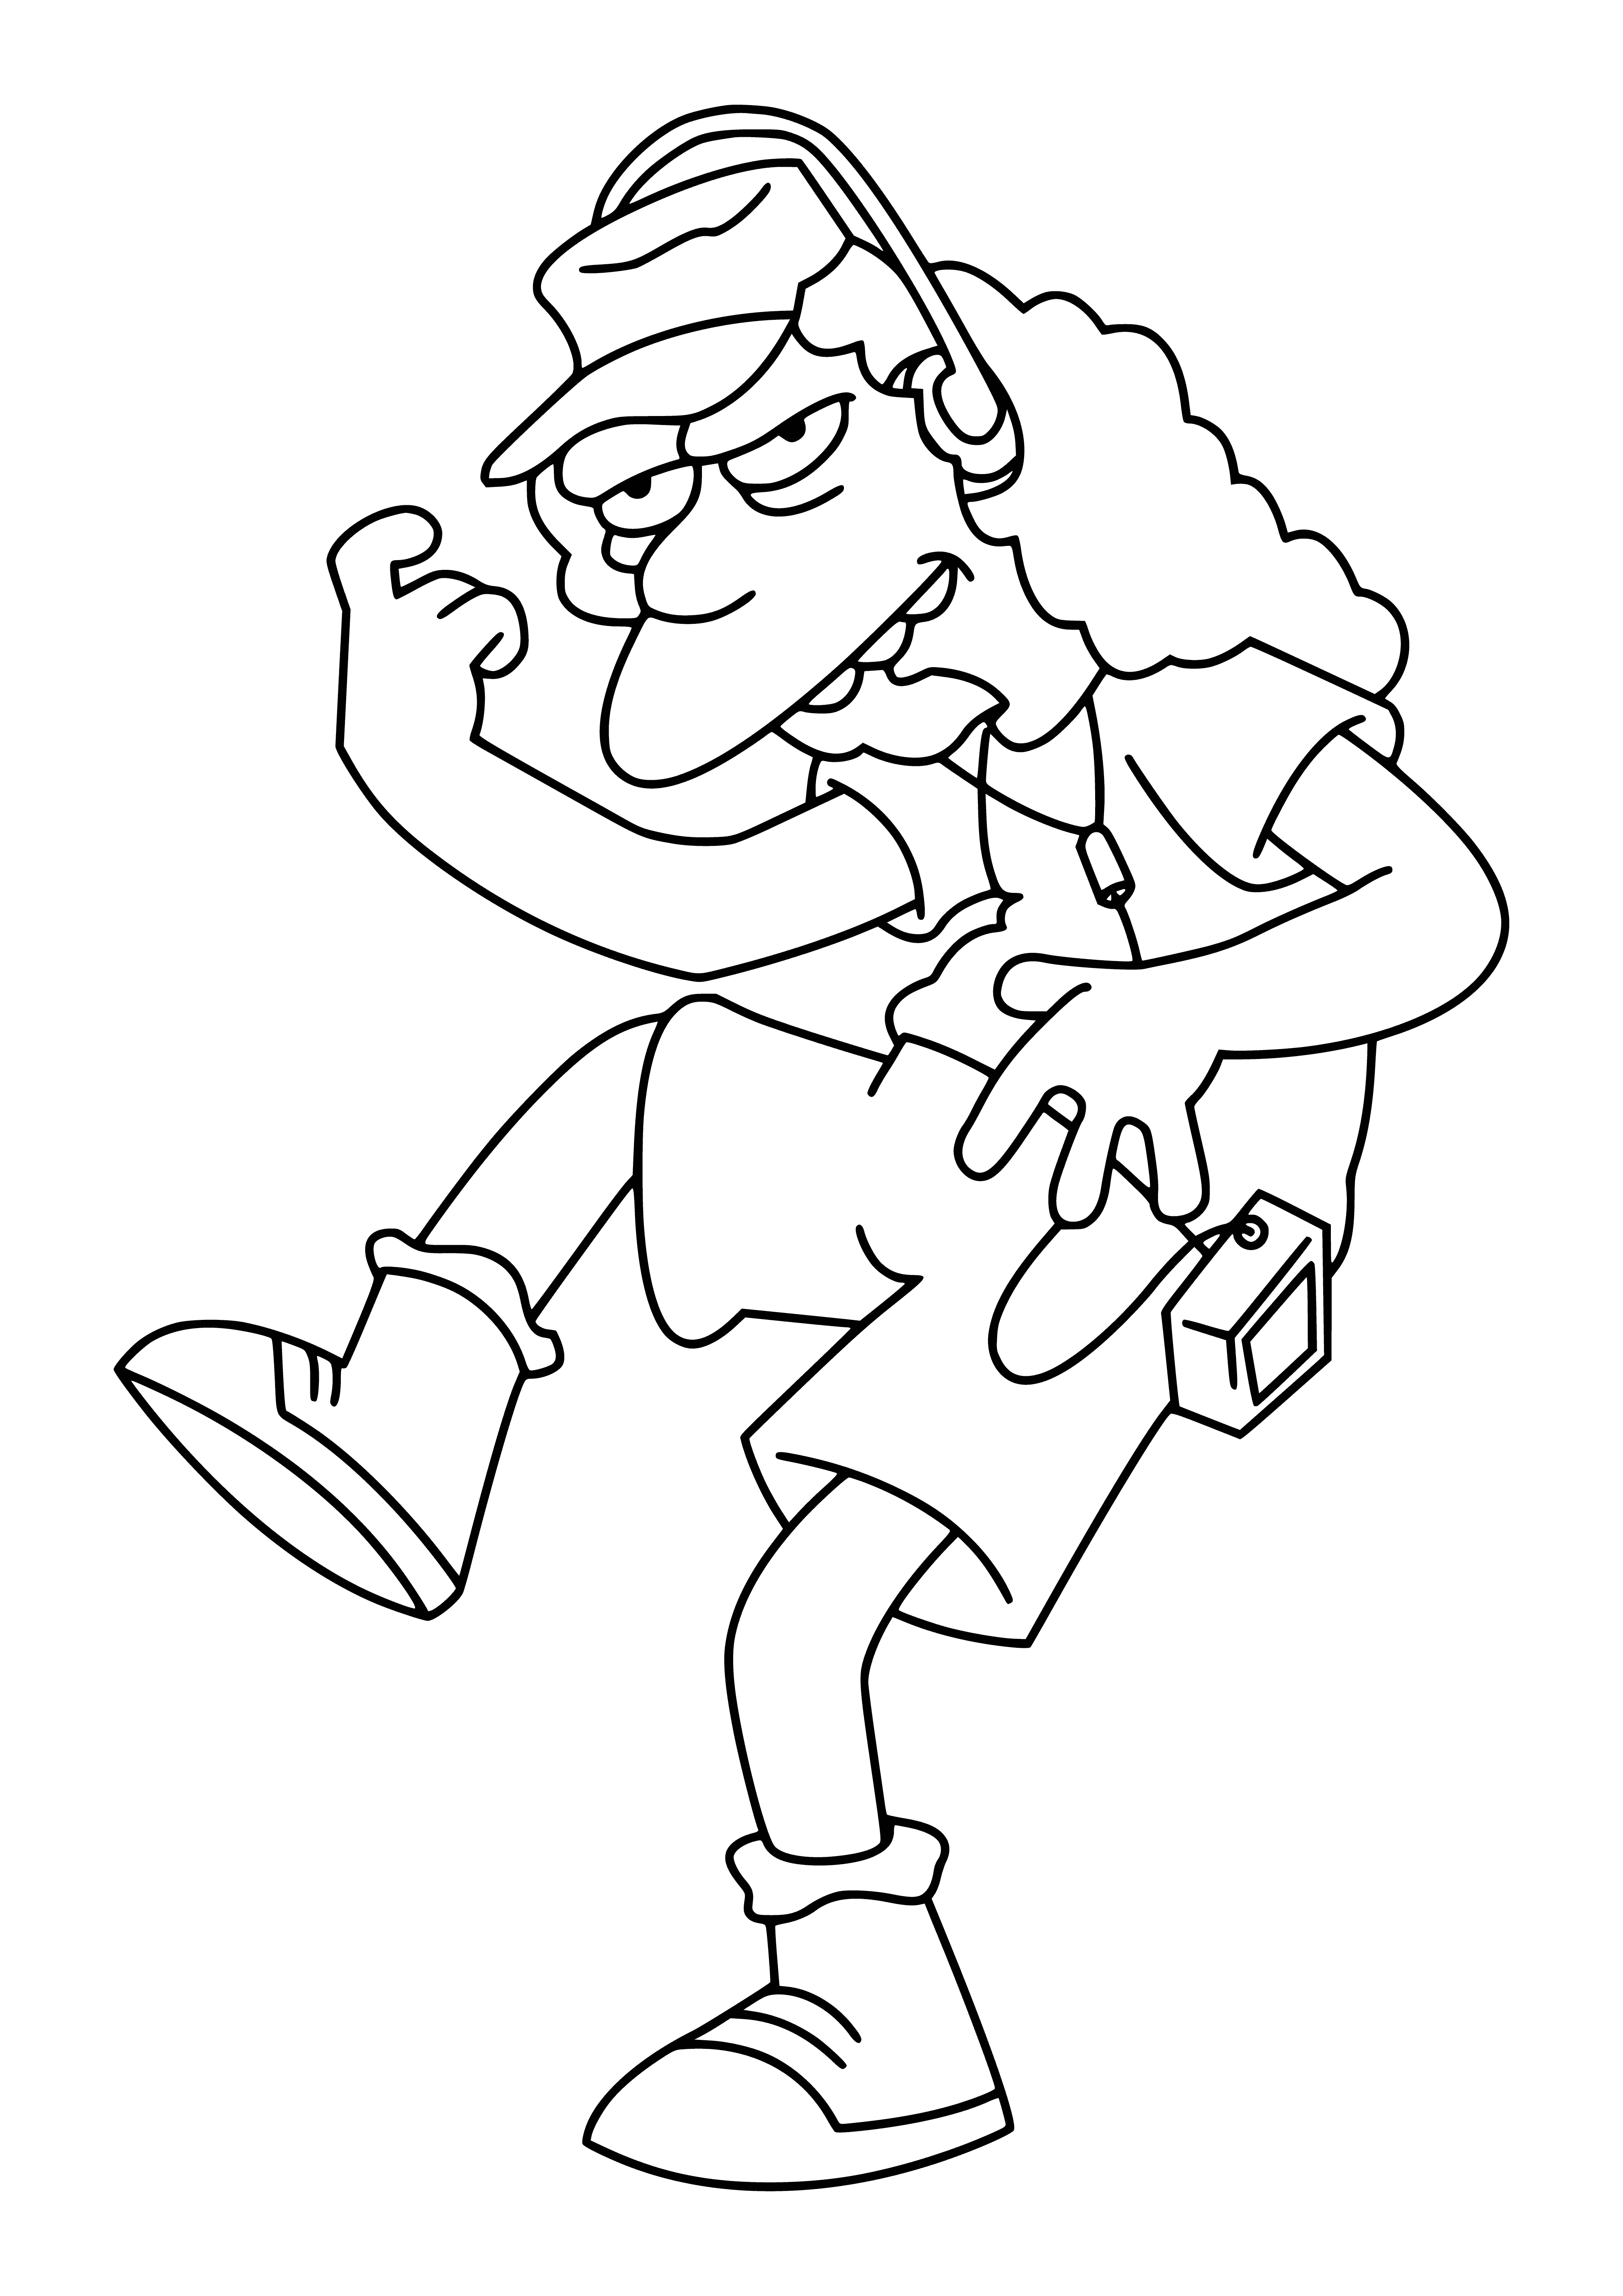 coloring page: Otto Mann is the lazy, hippie school bus driver for Springfield Elementary, who often naps & eats junk food on the job.